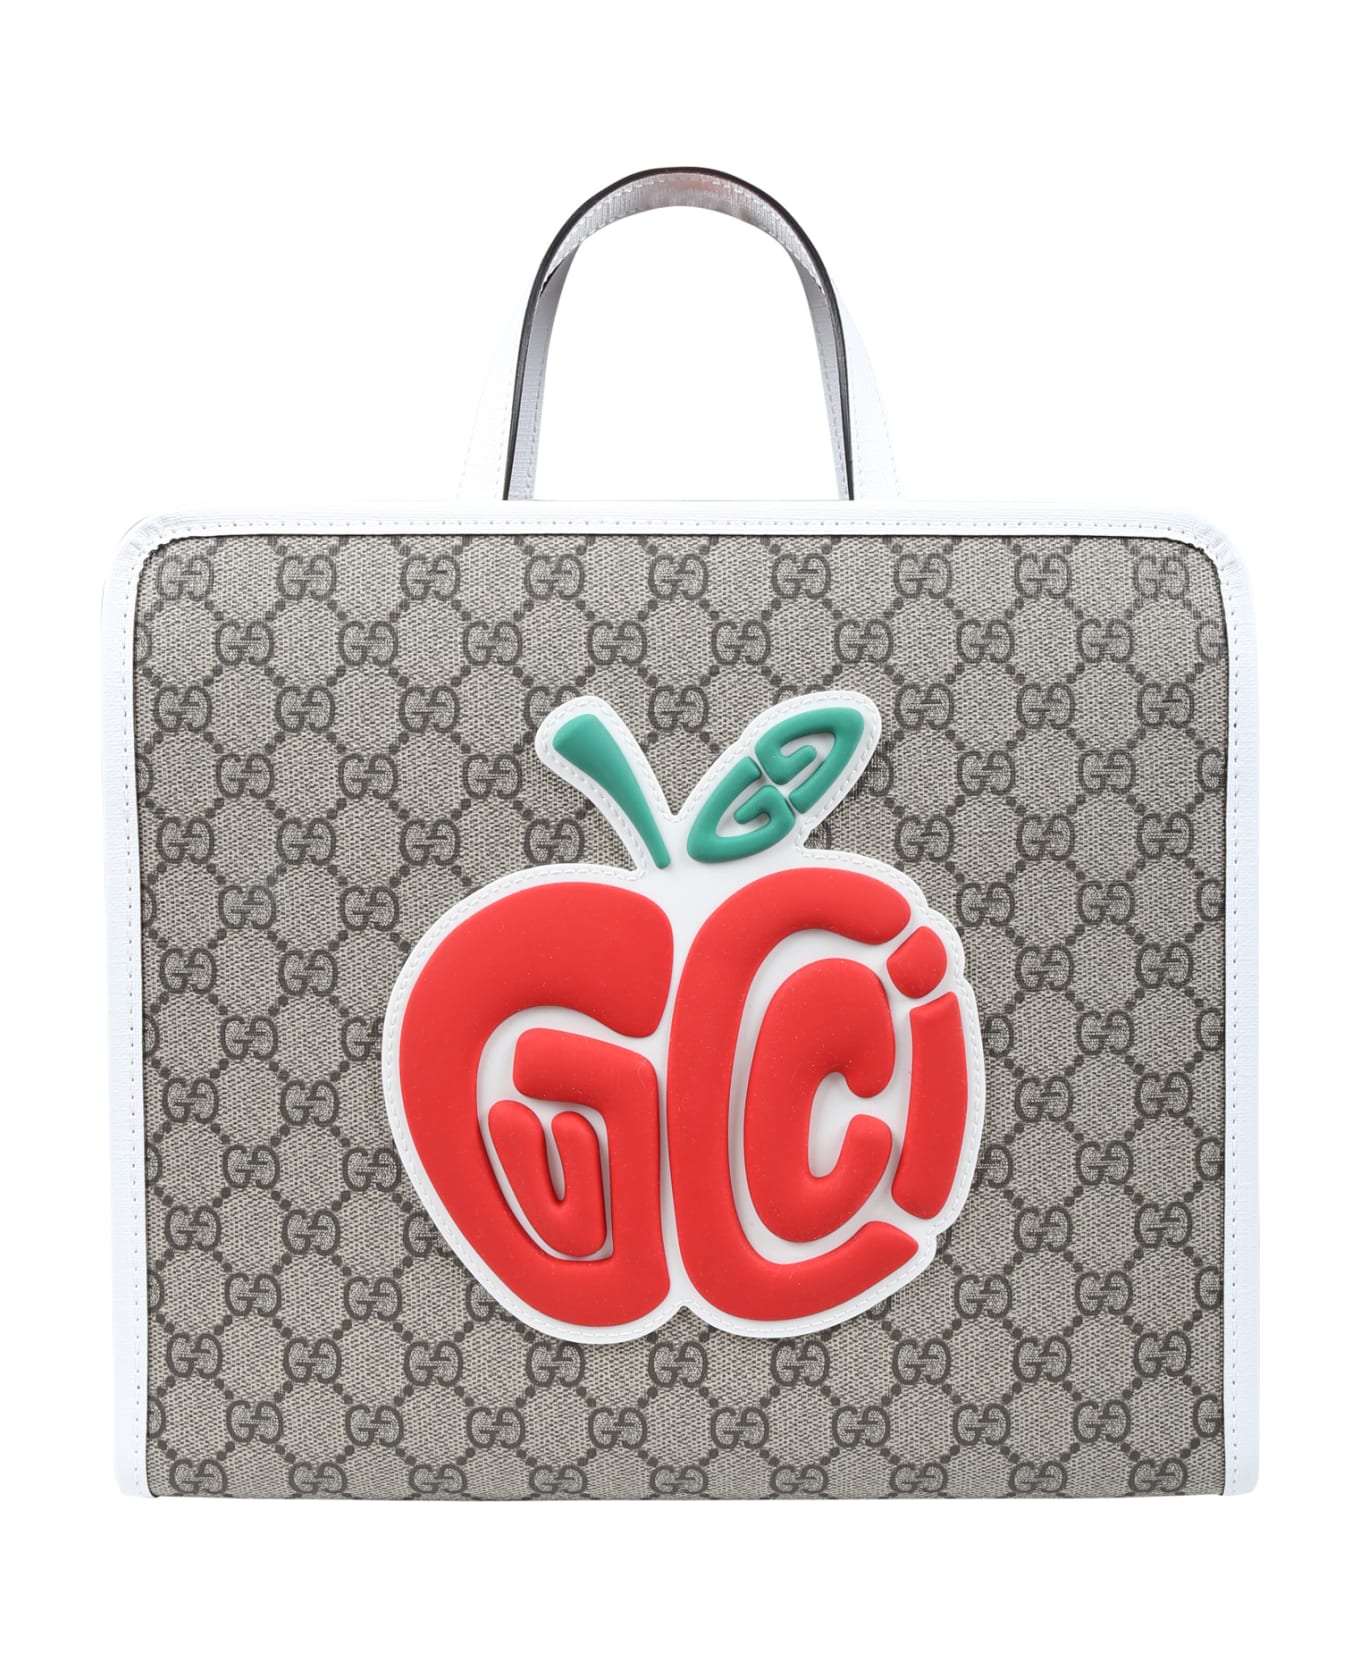 Gucci Brown Bag For Girl With Print - Brown アクセサリー＆ギフト